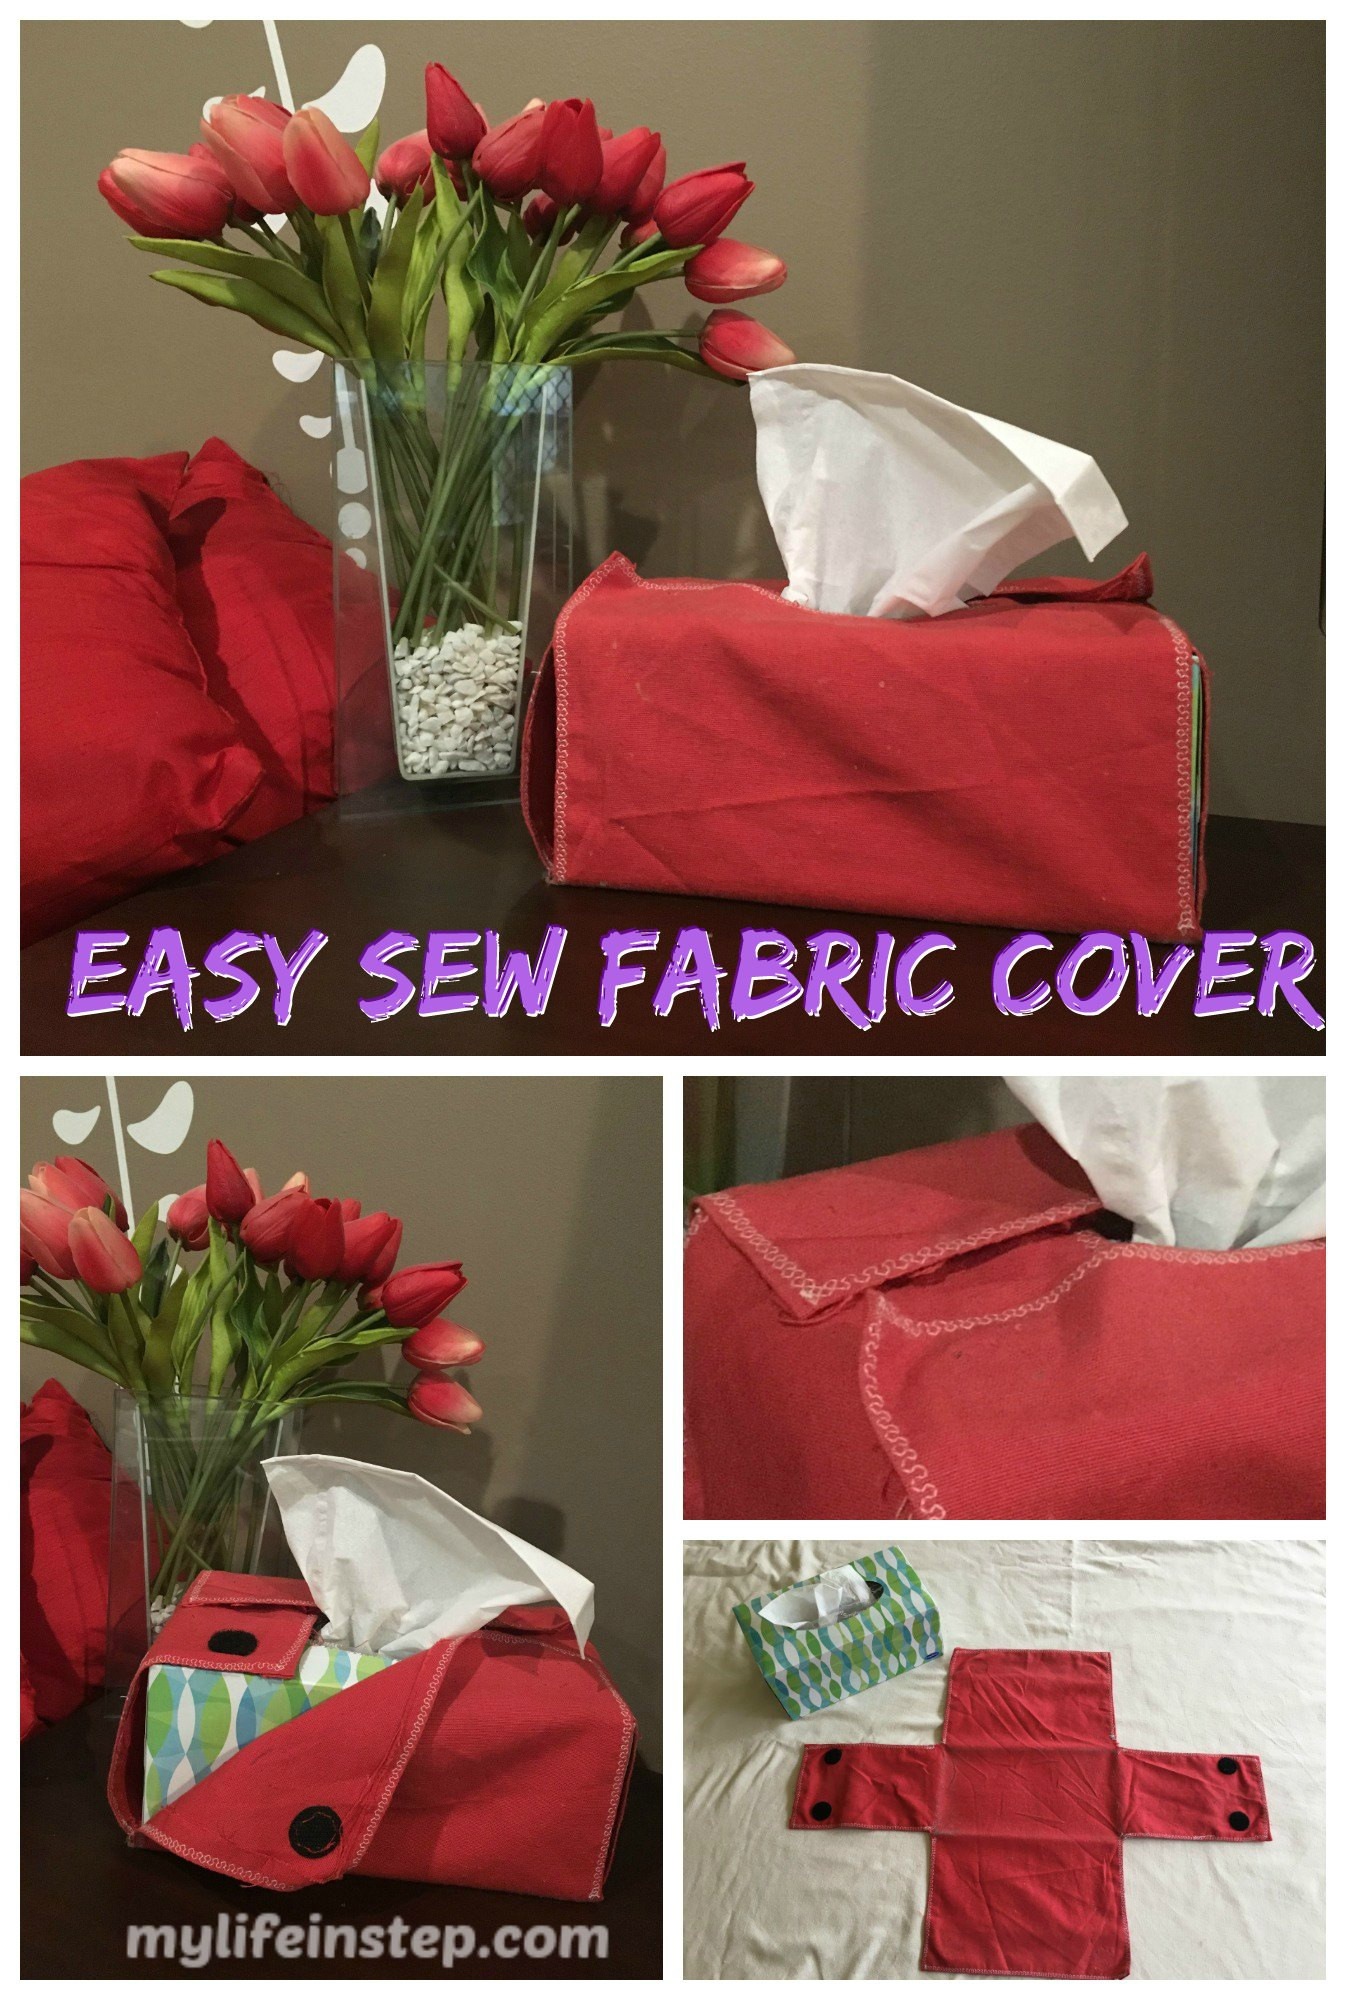 DIY Tissue Box Cover
 8 easy DIY Tissue Box Covers Jazz up the rooms in your